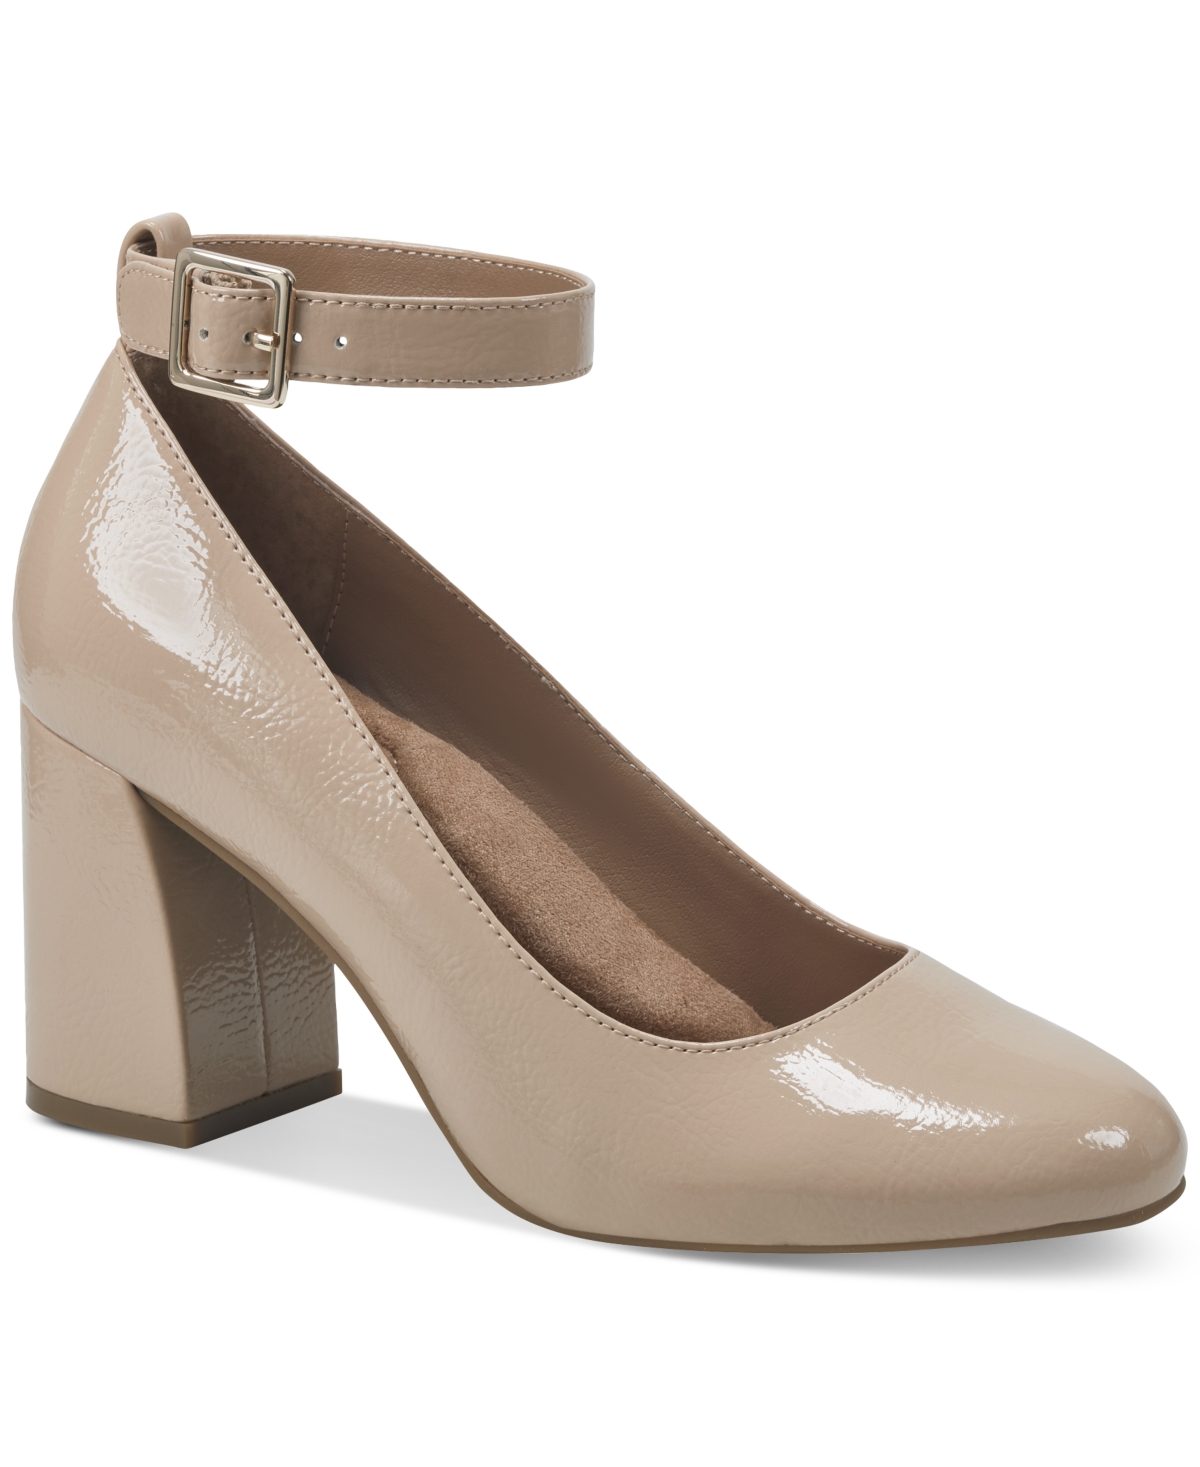 Valentinaa Ankle-Strap Dress Pumps, Created for Macy's - Nude Patent